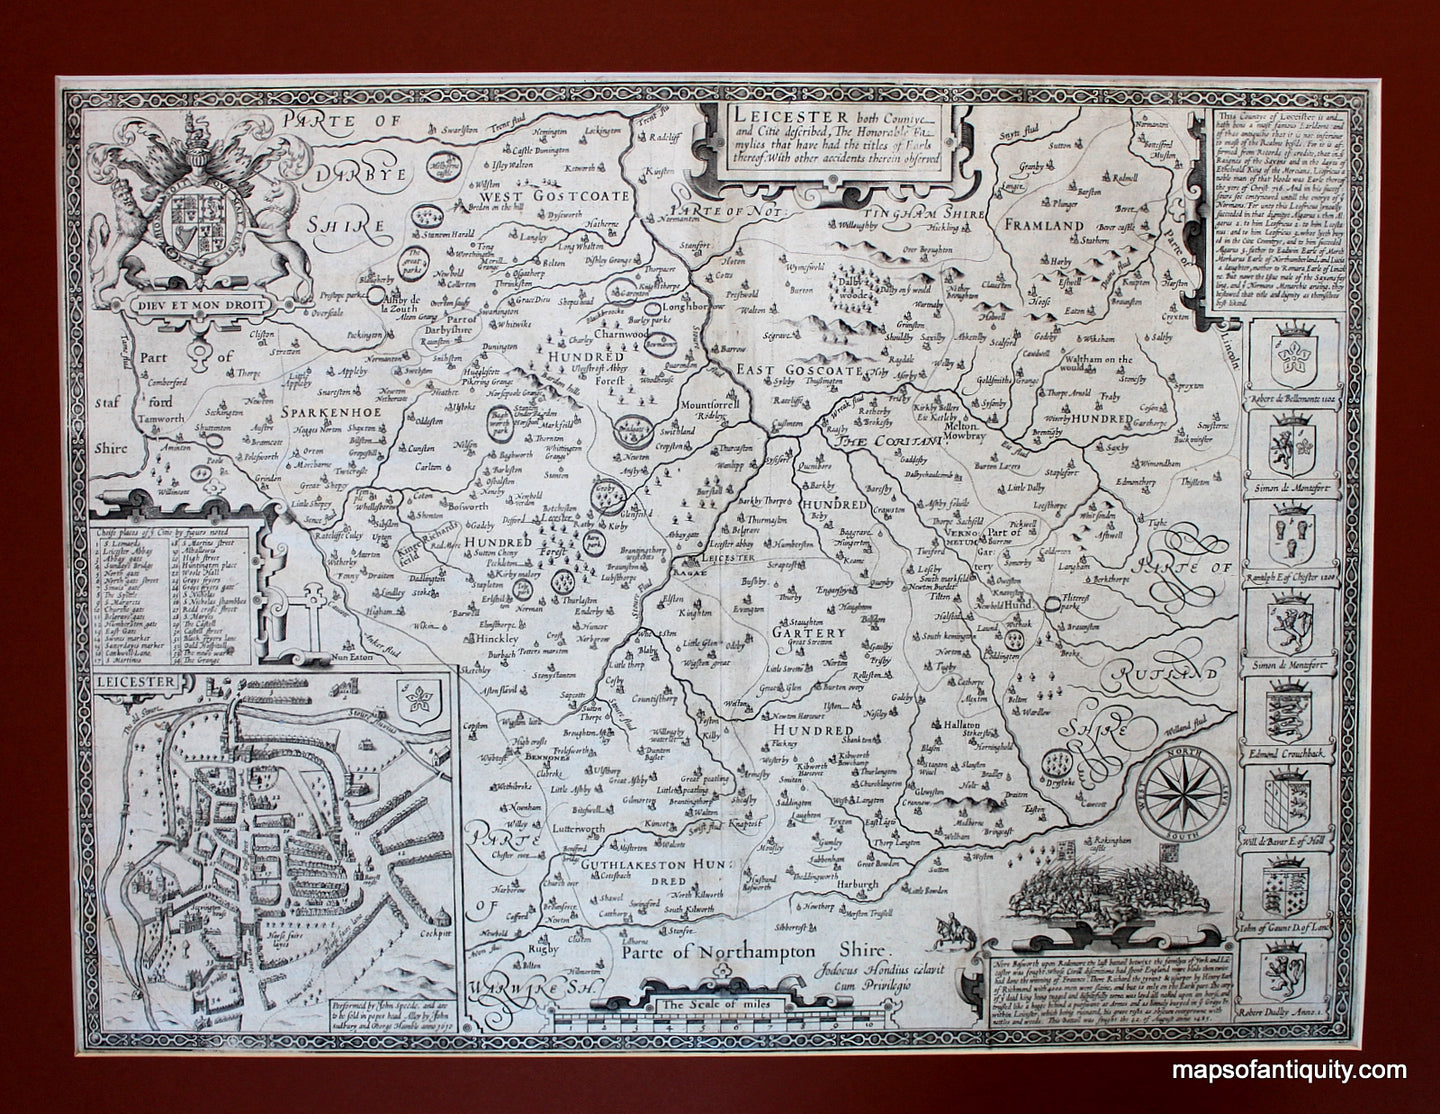 Antique-Black-and-White-Map-Leicester-**********-Europe-United-Kingdom-1610-Speed-Maps-Of-Antiquity